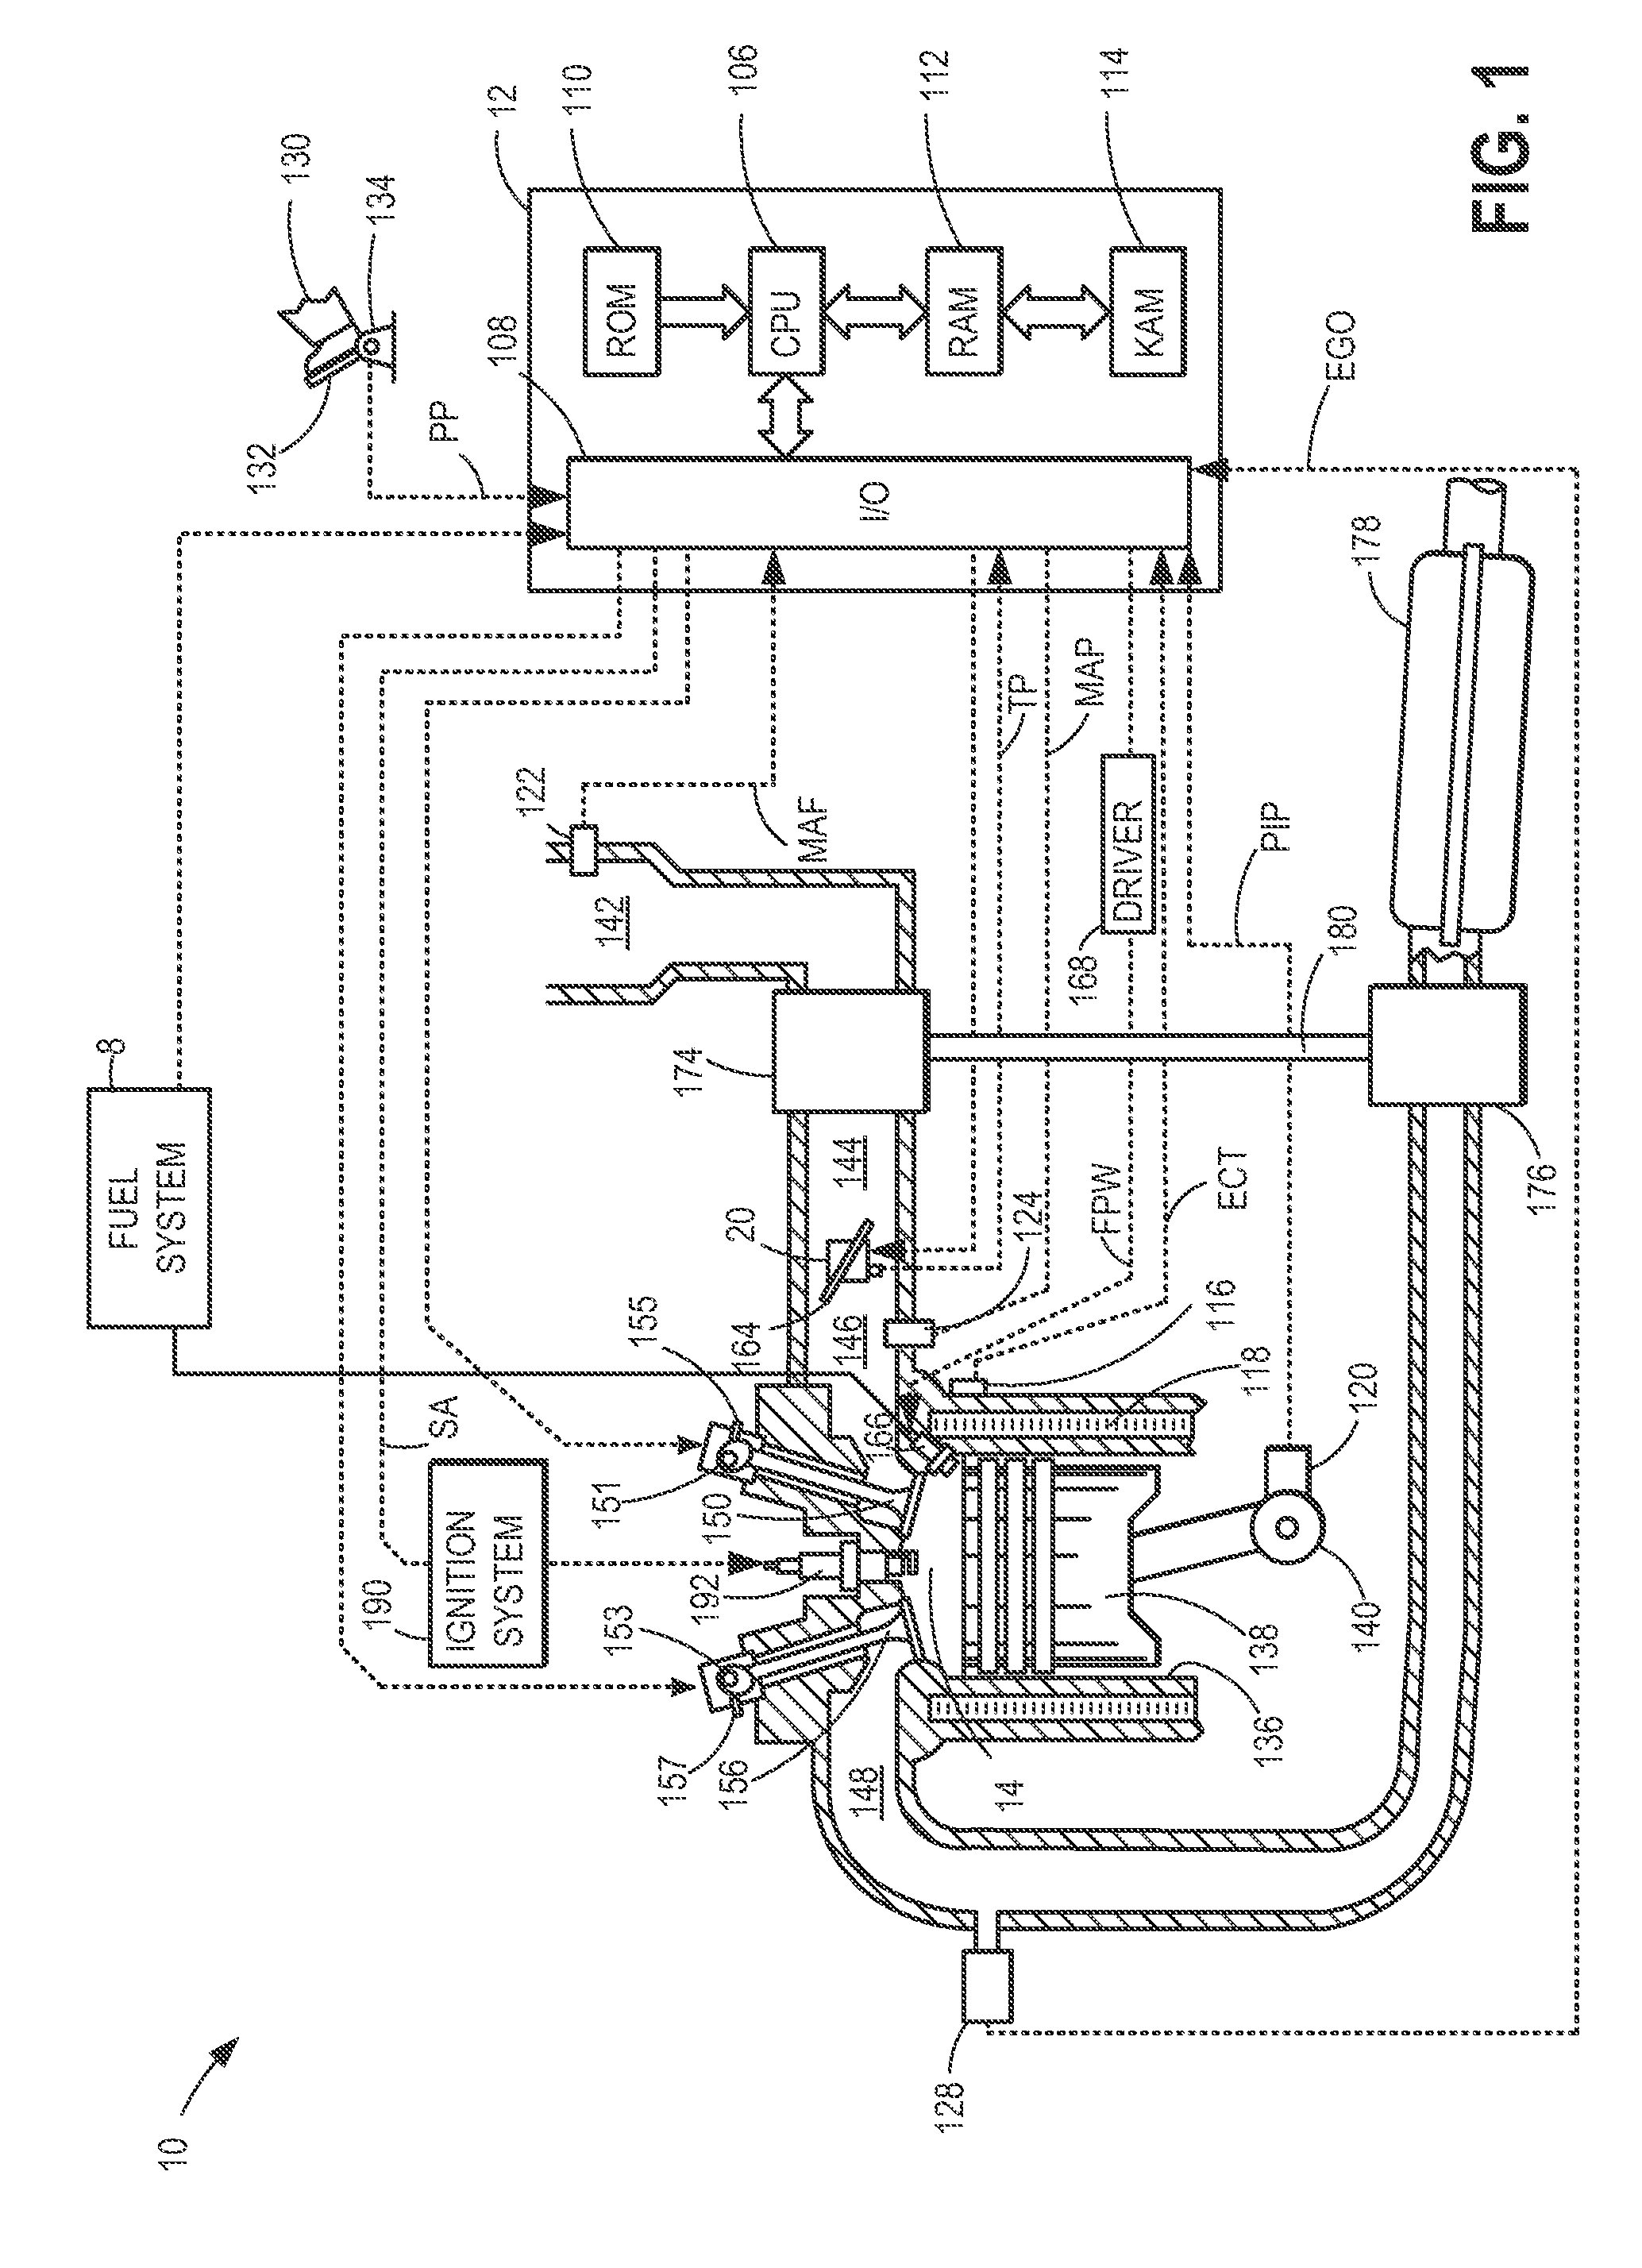 Method and system for pre-ignition control